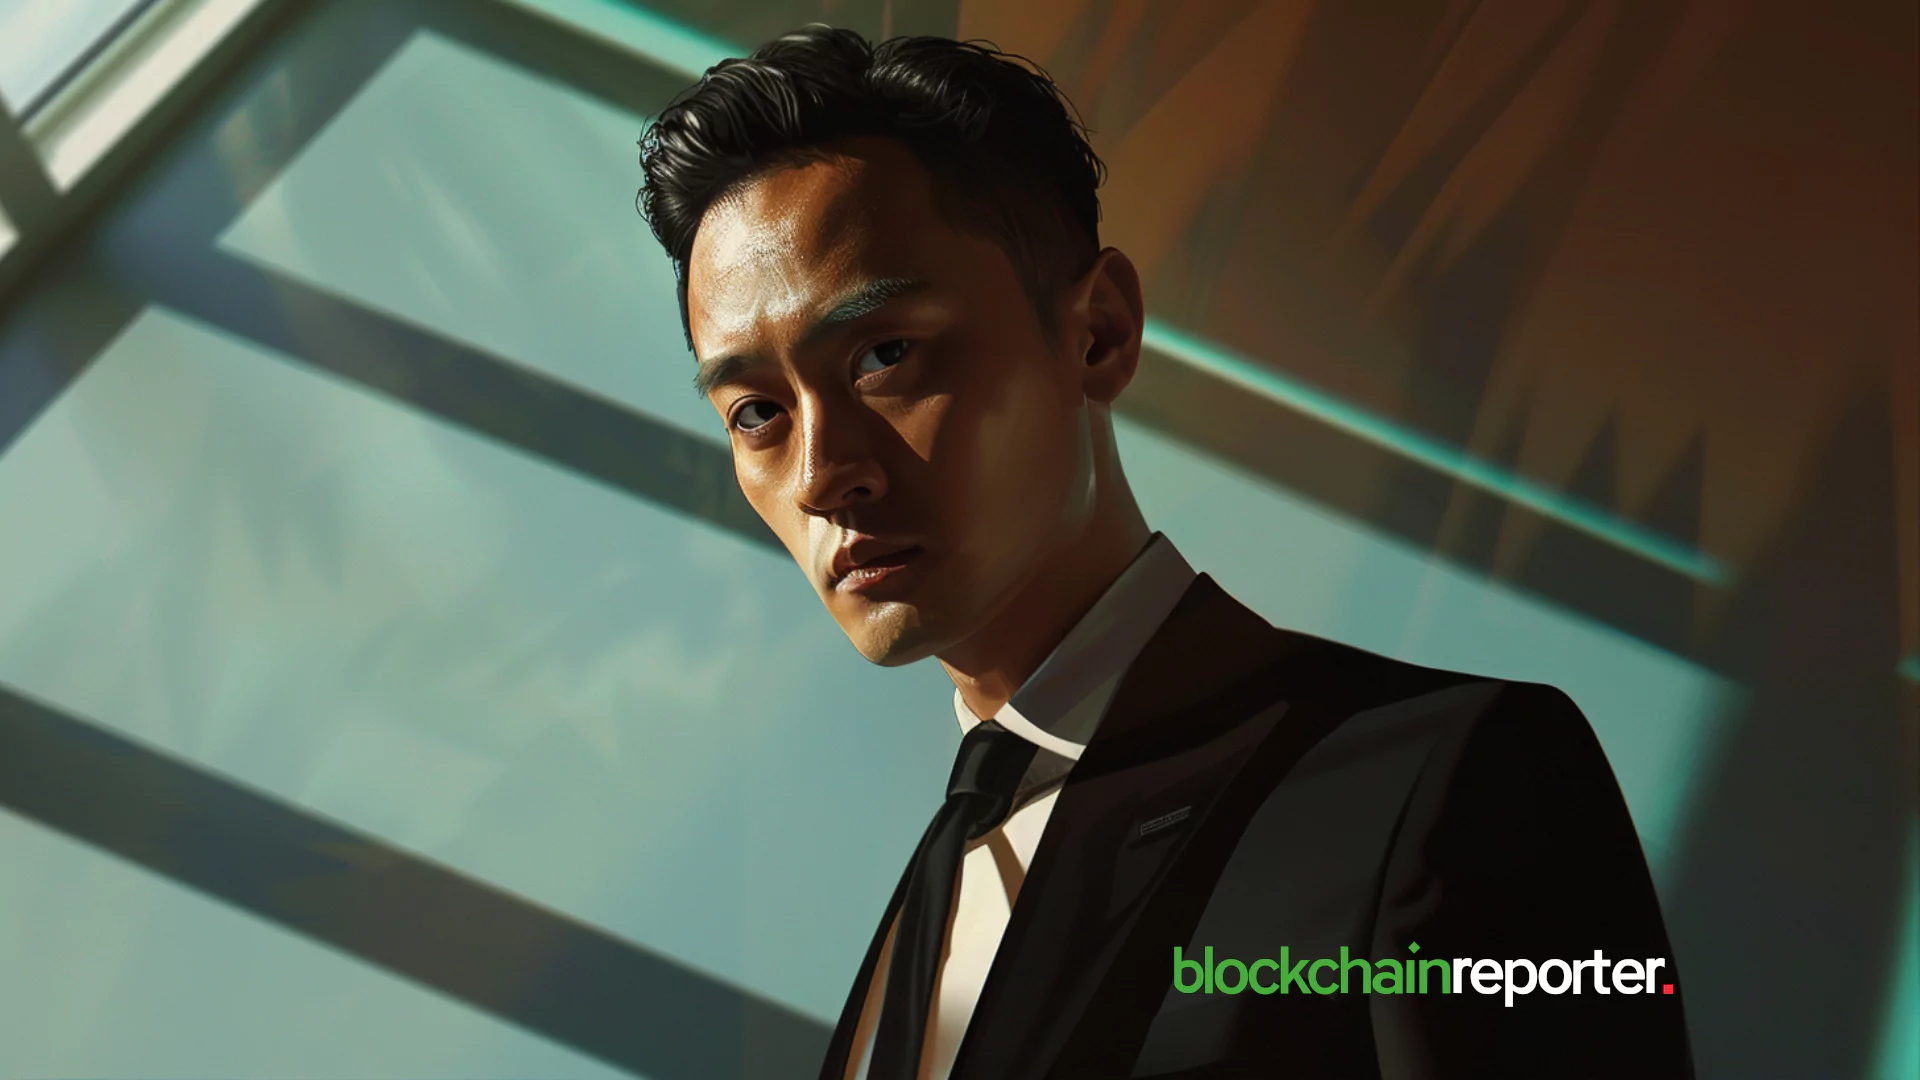 Justin Sun Offers to Buy German Government’s Bitcoin Off-Market